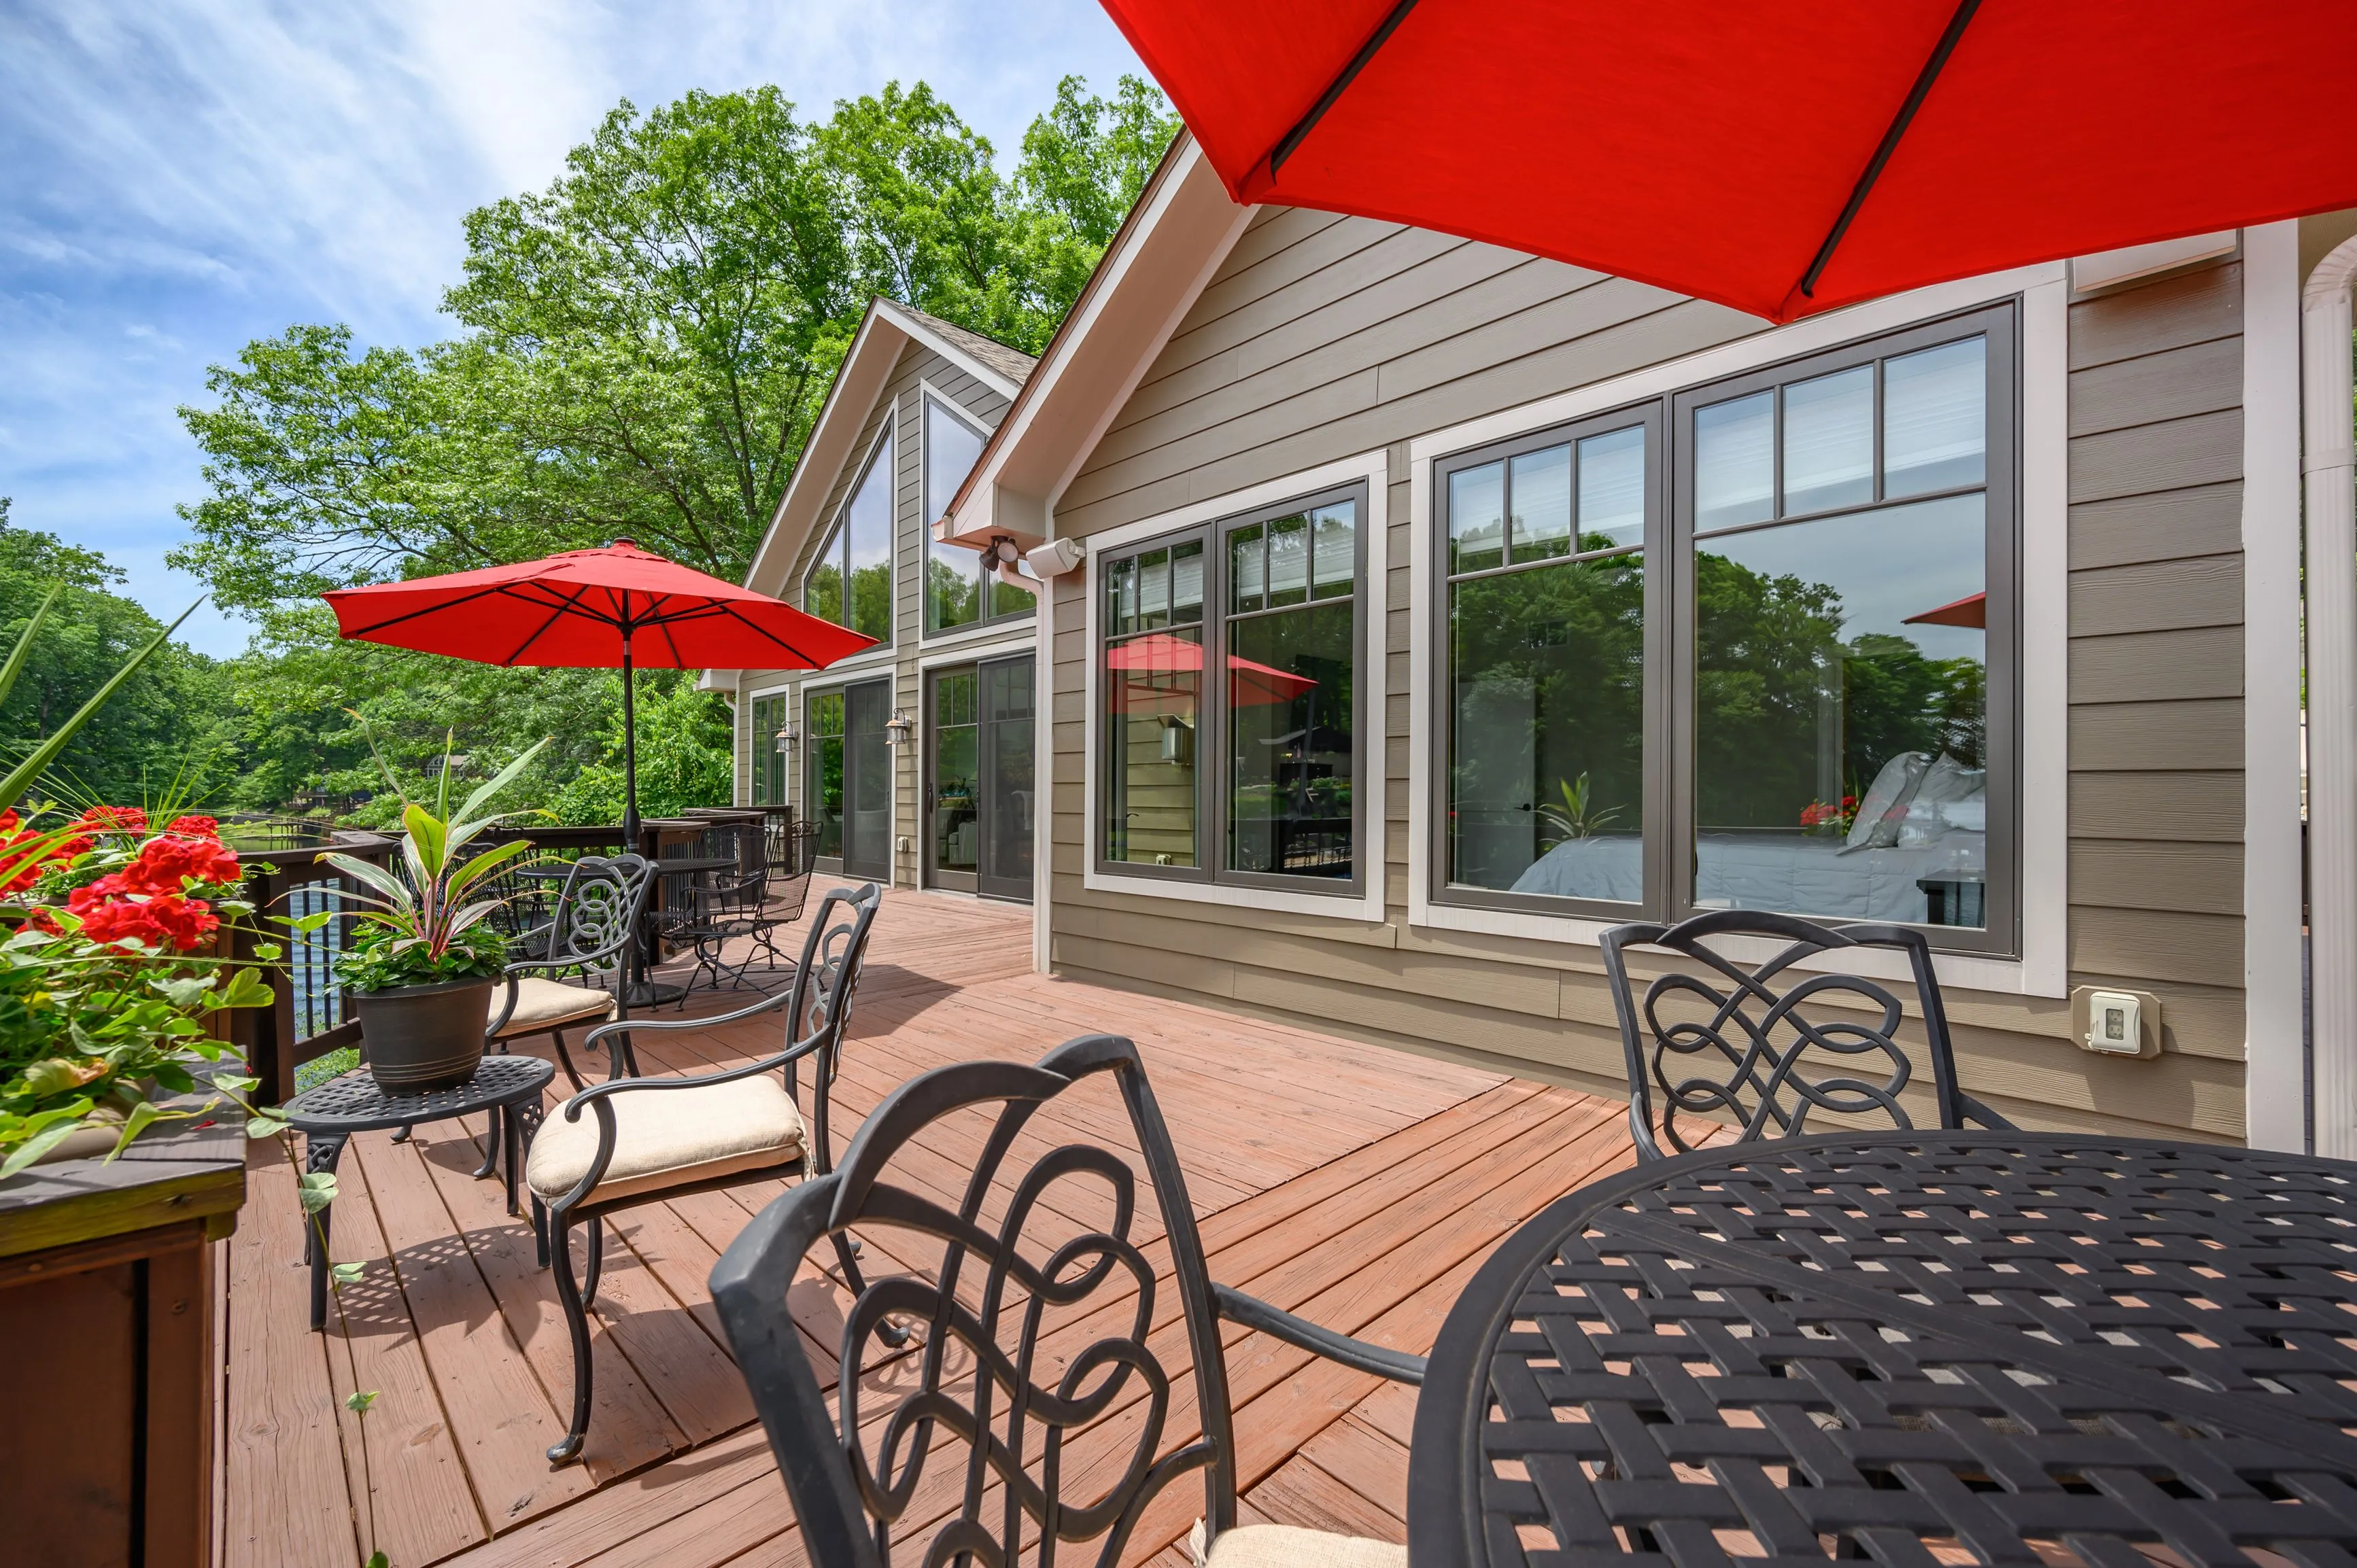 Wooden deck of a house with outdoor furniture and a red umbrella on a sunny day.